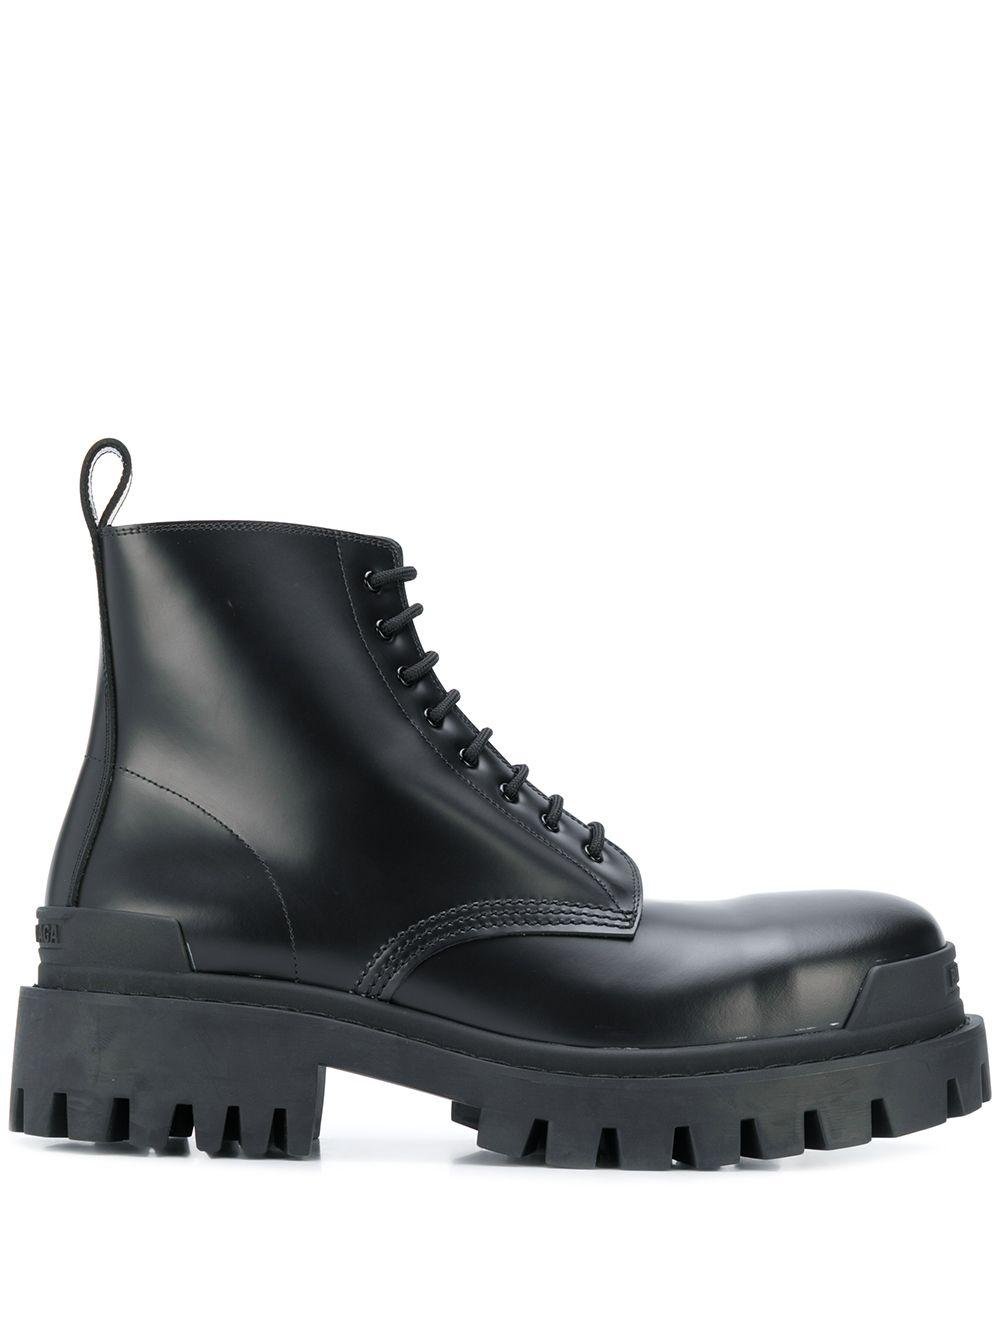 Balenciaga Leather Strike Lace-up Boots in Black for Men - Lyst